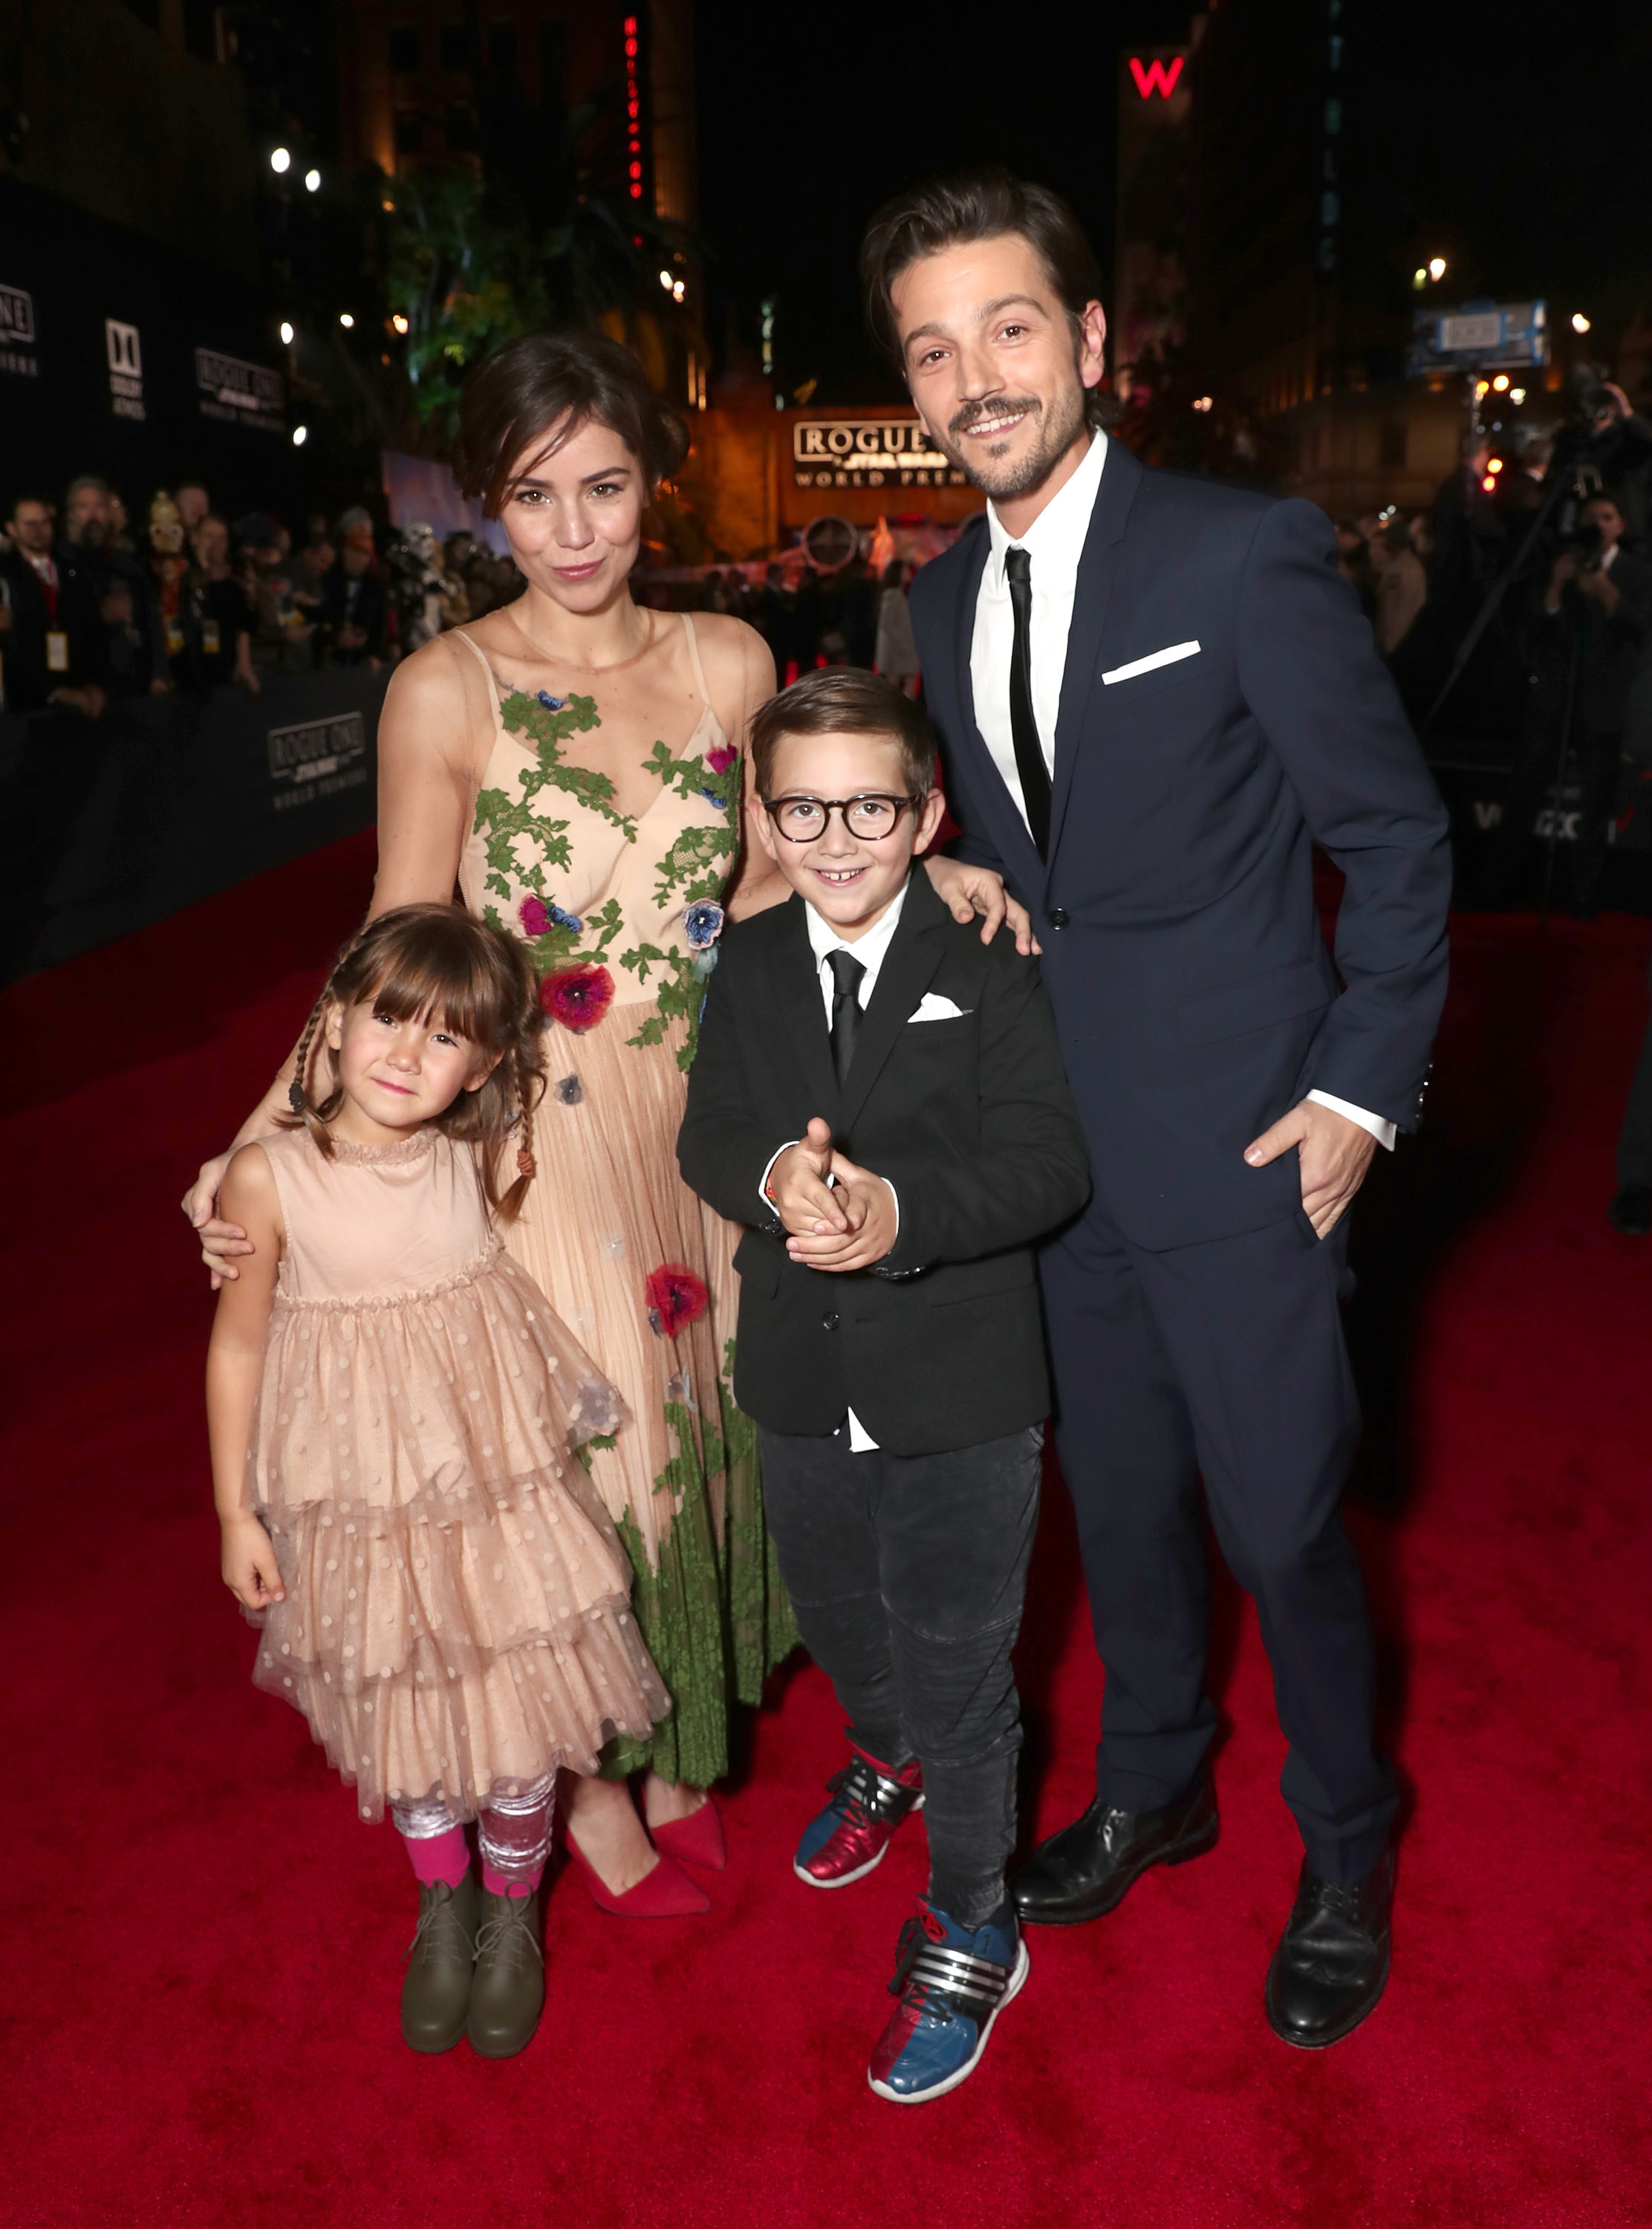 Diego Luna and Camila Sodi on a red carpet with their two kids